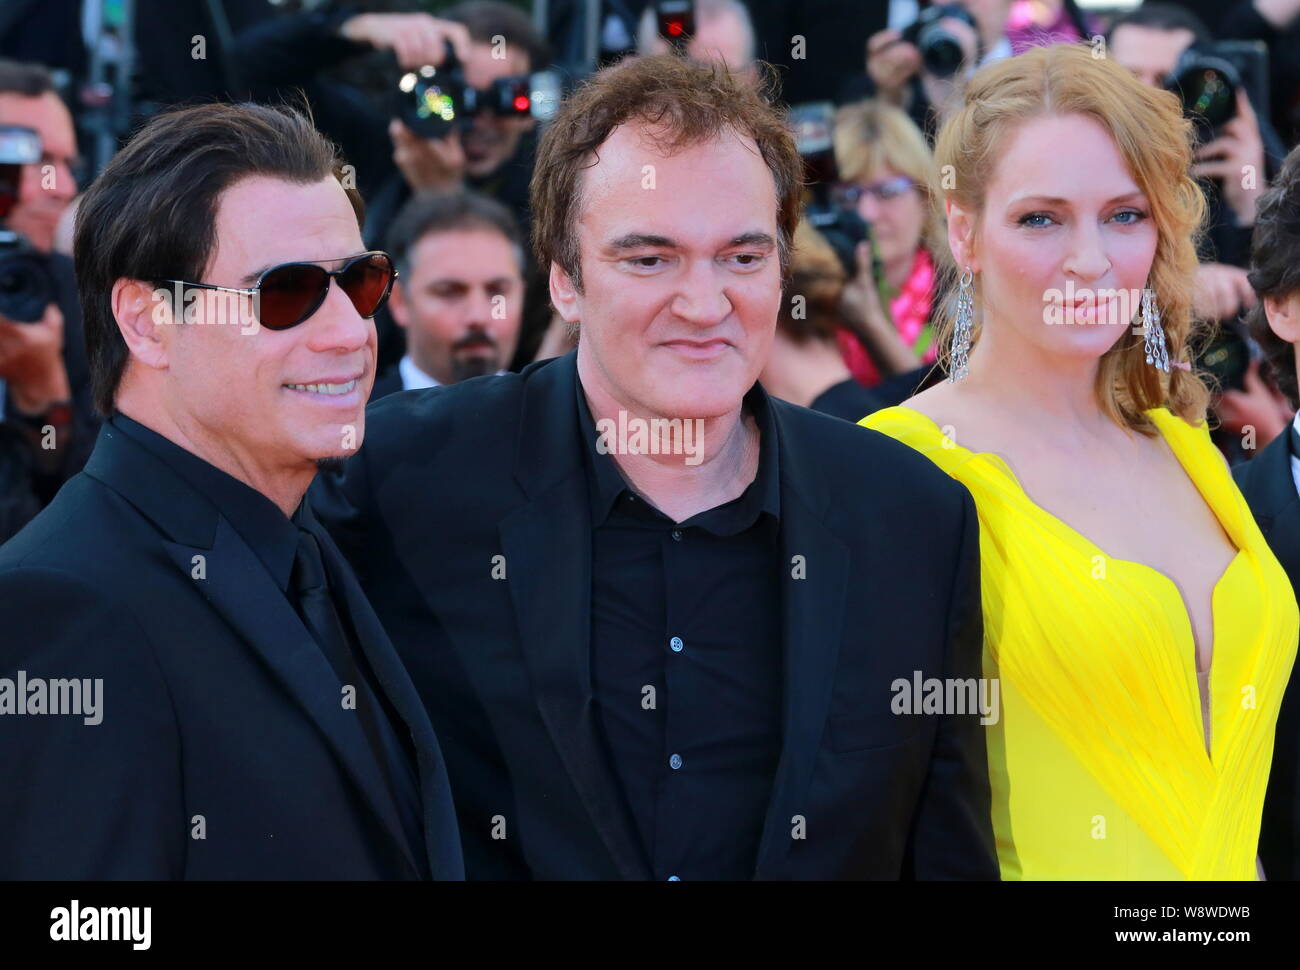 (From left) American actor John Travolta, Quentin Tarantino and actress Uma Thurman pose at a premiere for the movie, Clouds of Sils Maria, during the Stock Photo